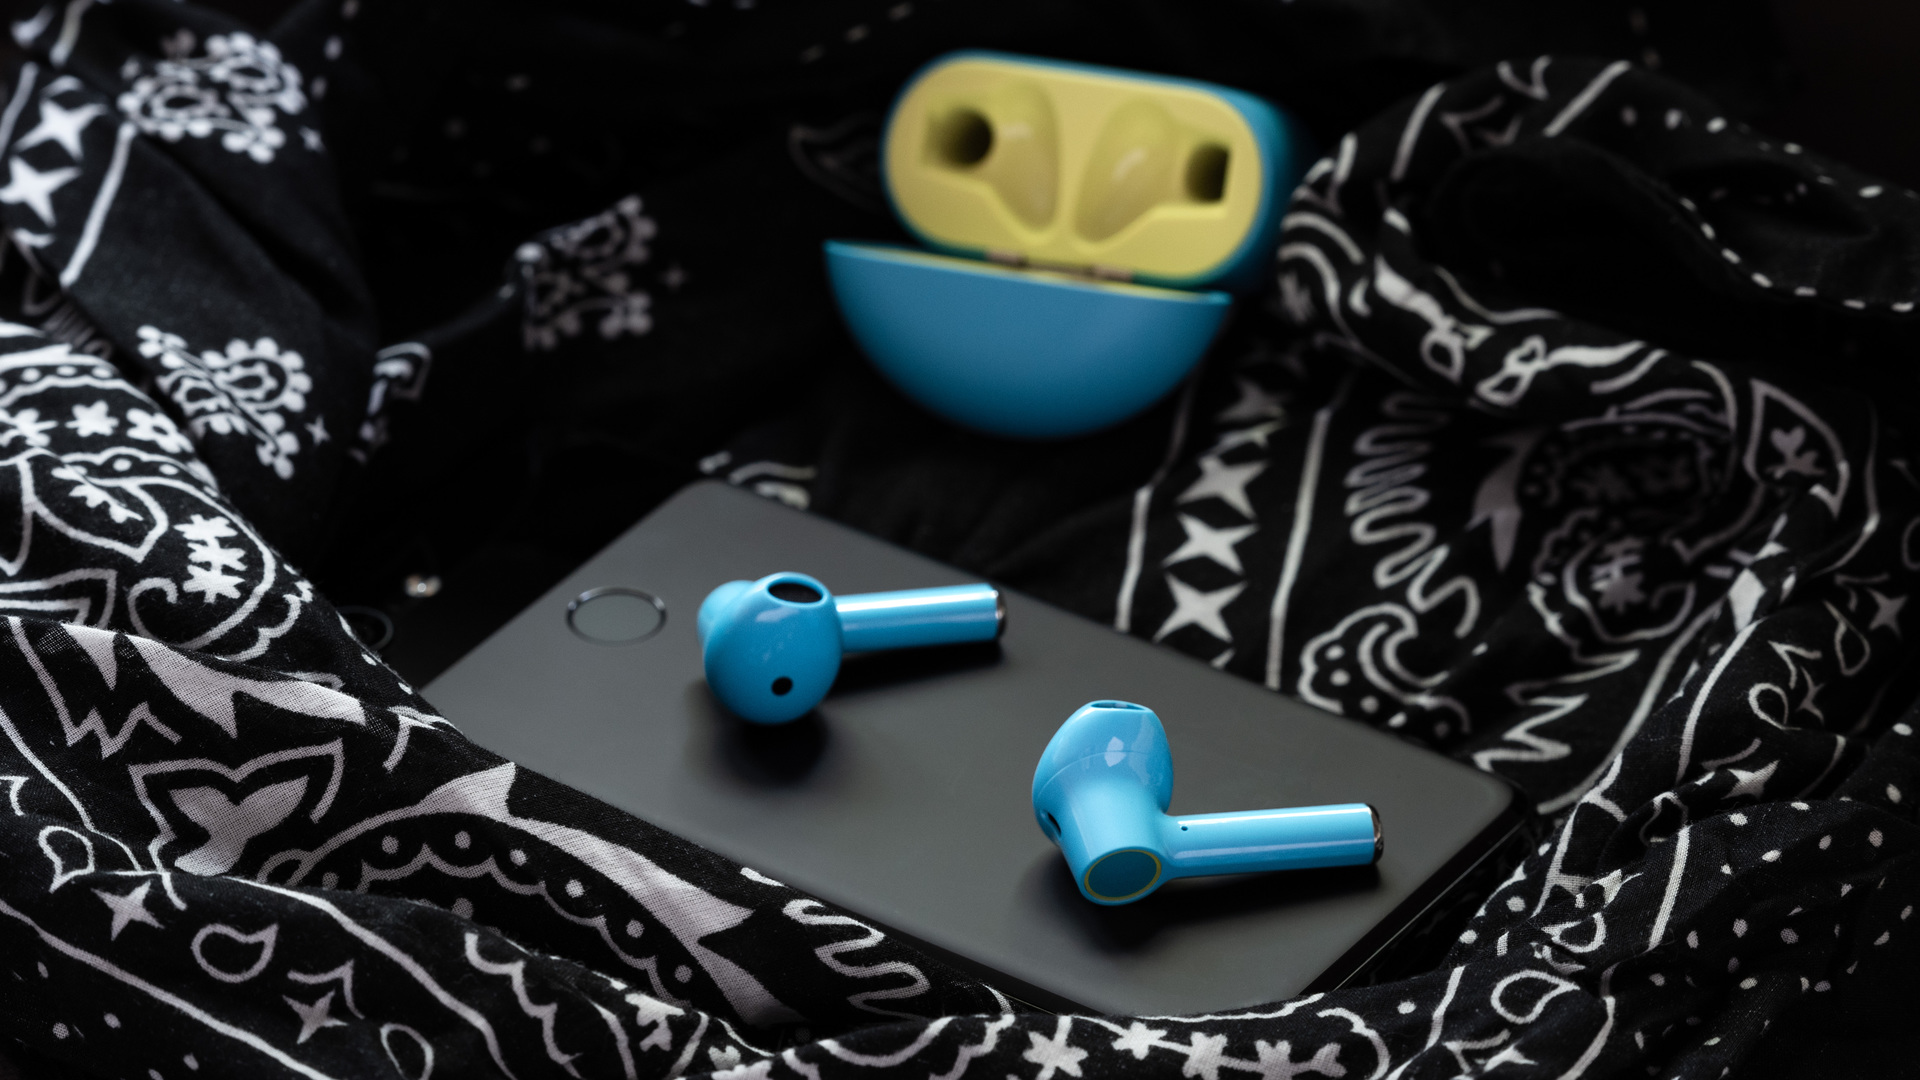 A picture of the OnePlus Buds true wireless earbuds (Nord Blue color) on a Google Pixel 3 smartphone with the earbuds charging case open in the background.